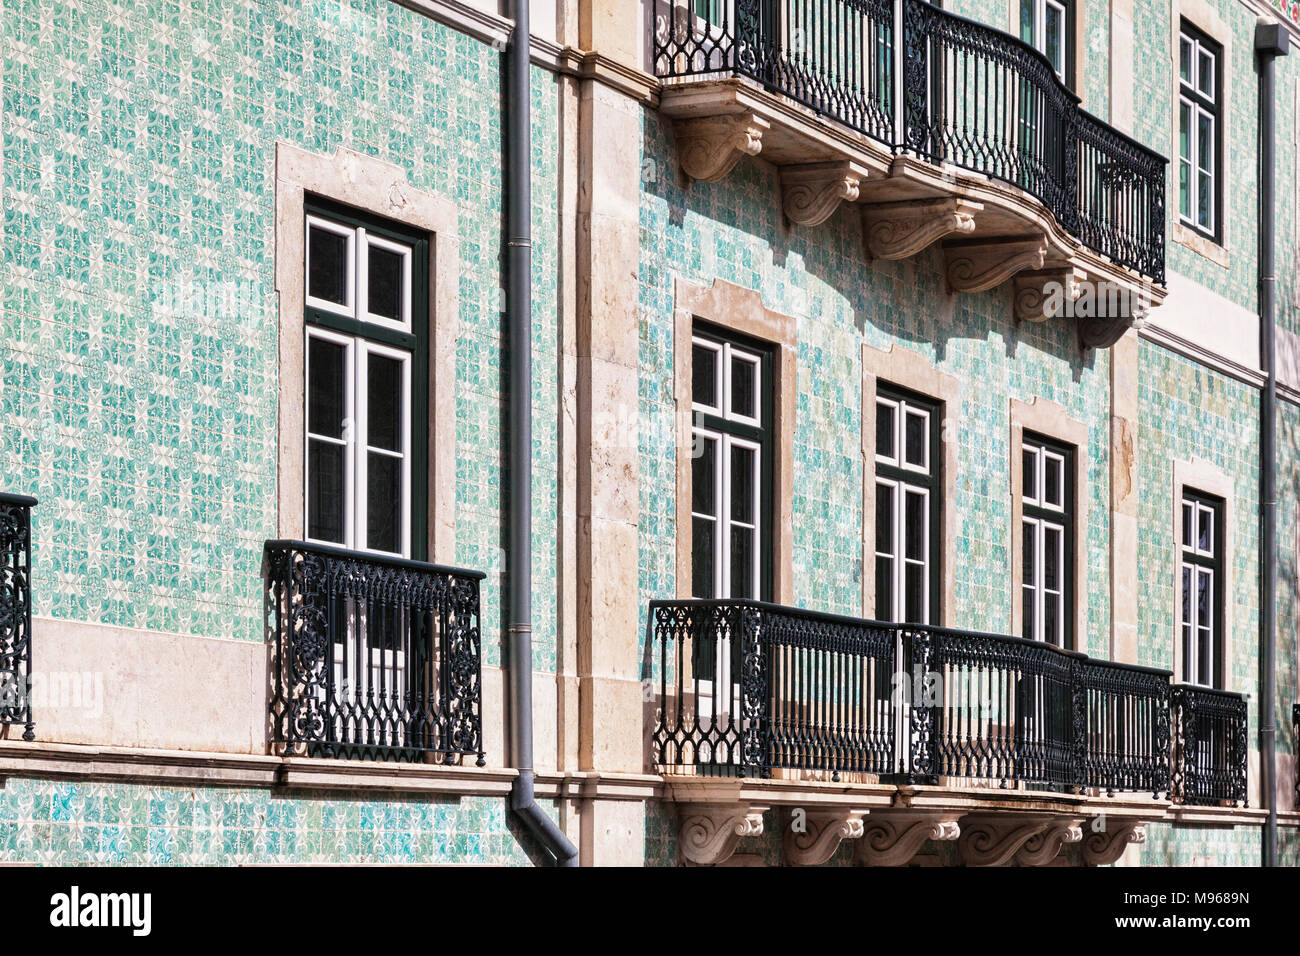 1 March 2018: Lisbon, Portugal - Building in the Old Town with typical ceramic tiled facade and wrought iron balconies. Stock Photo